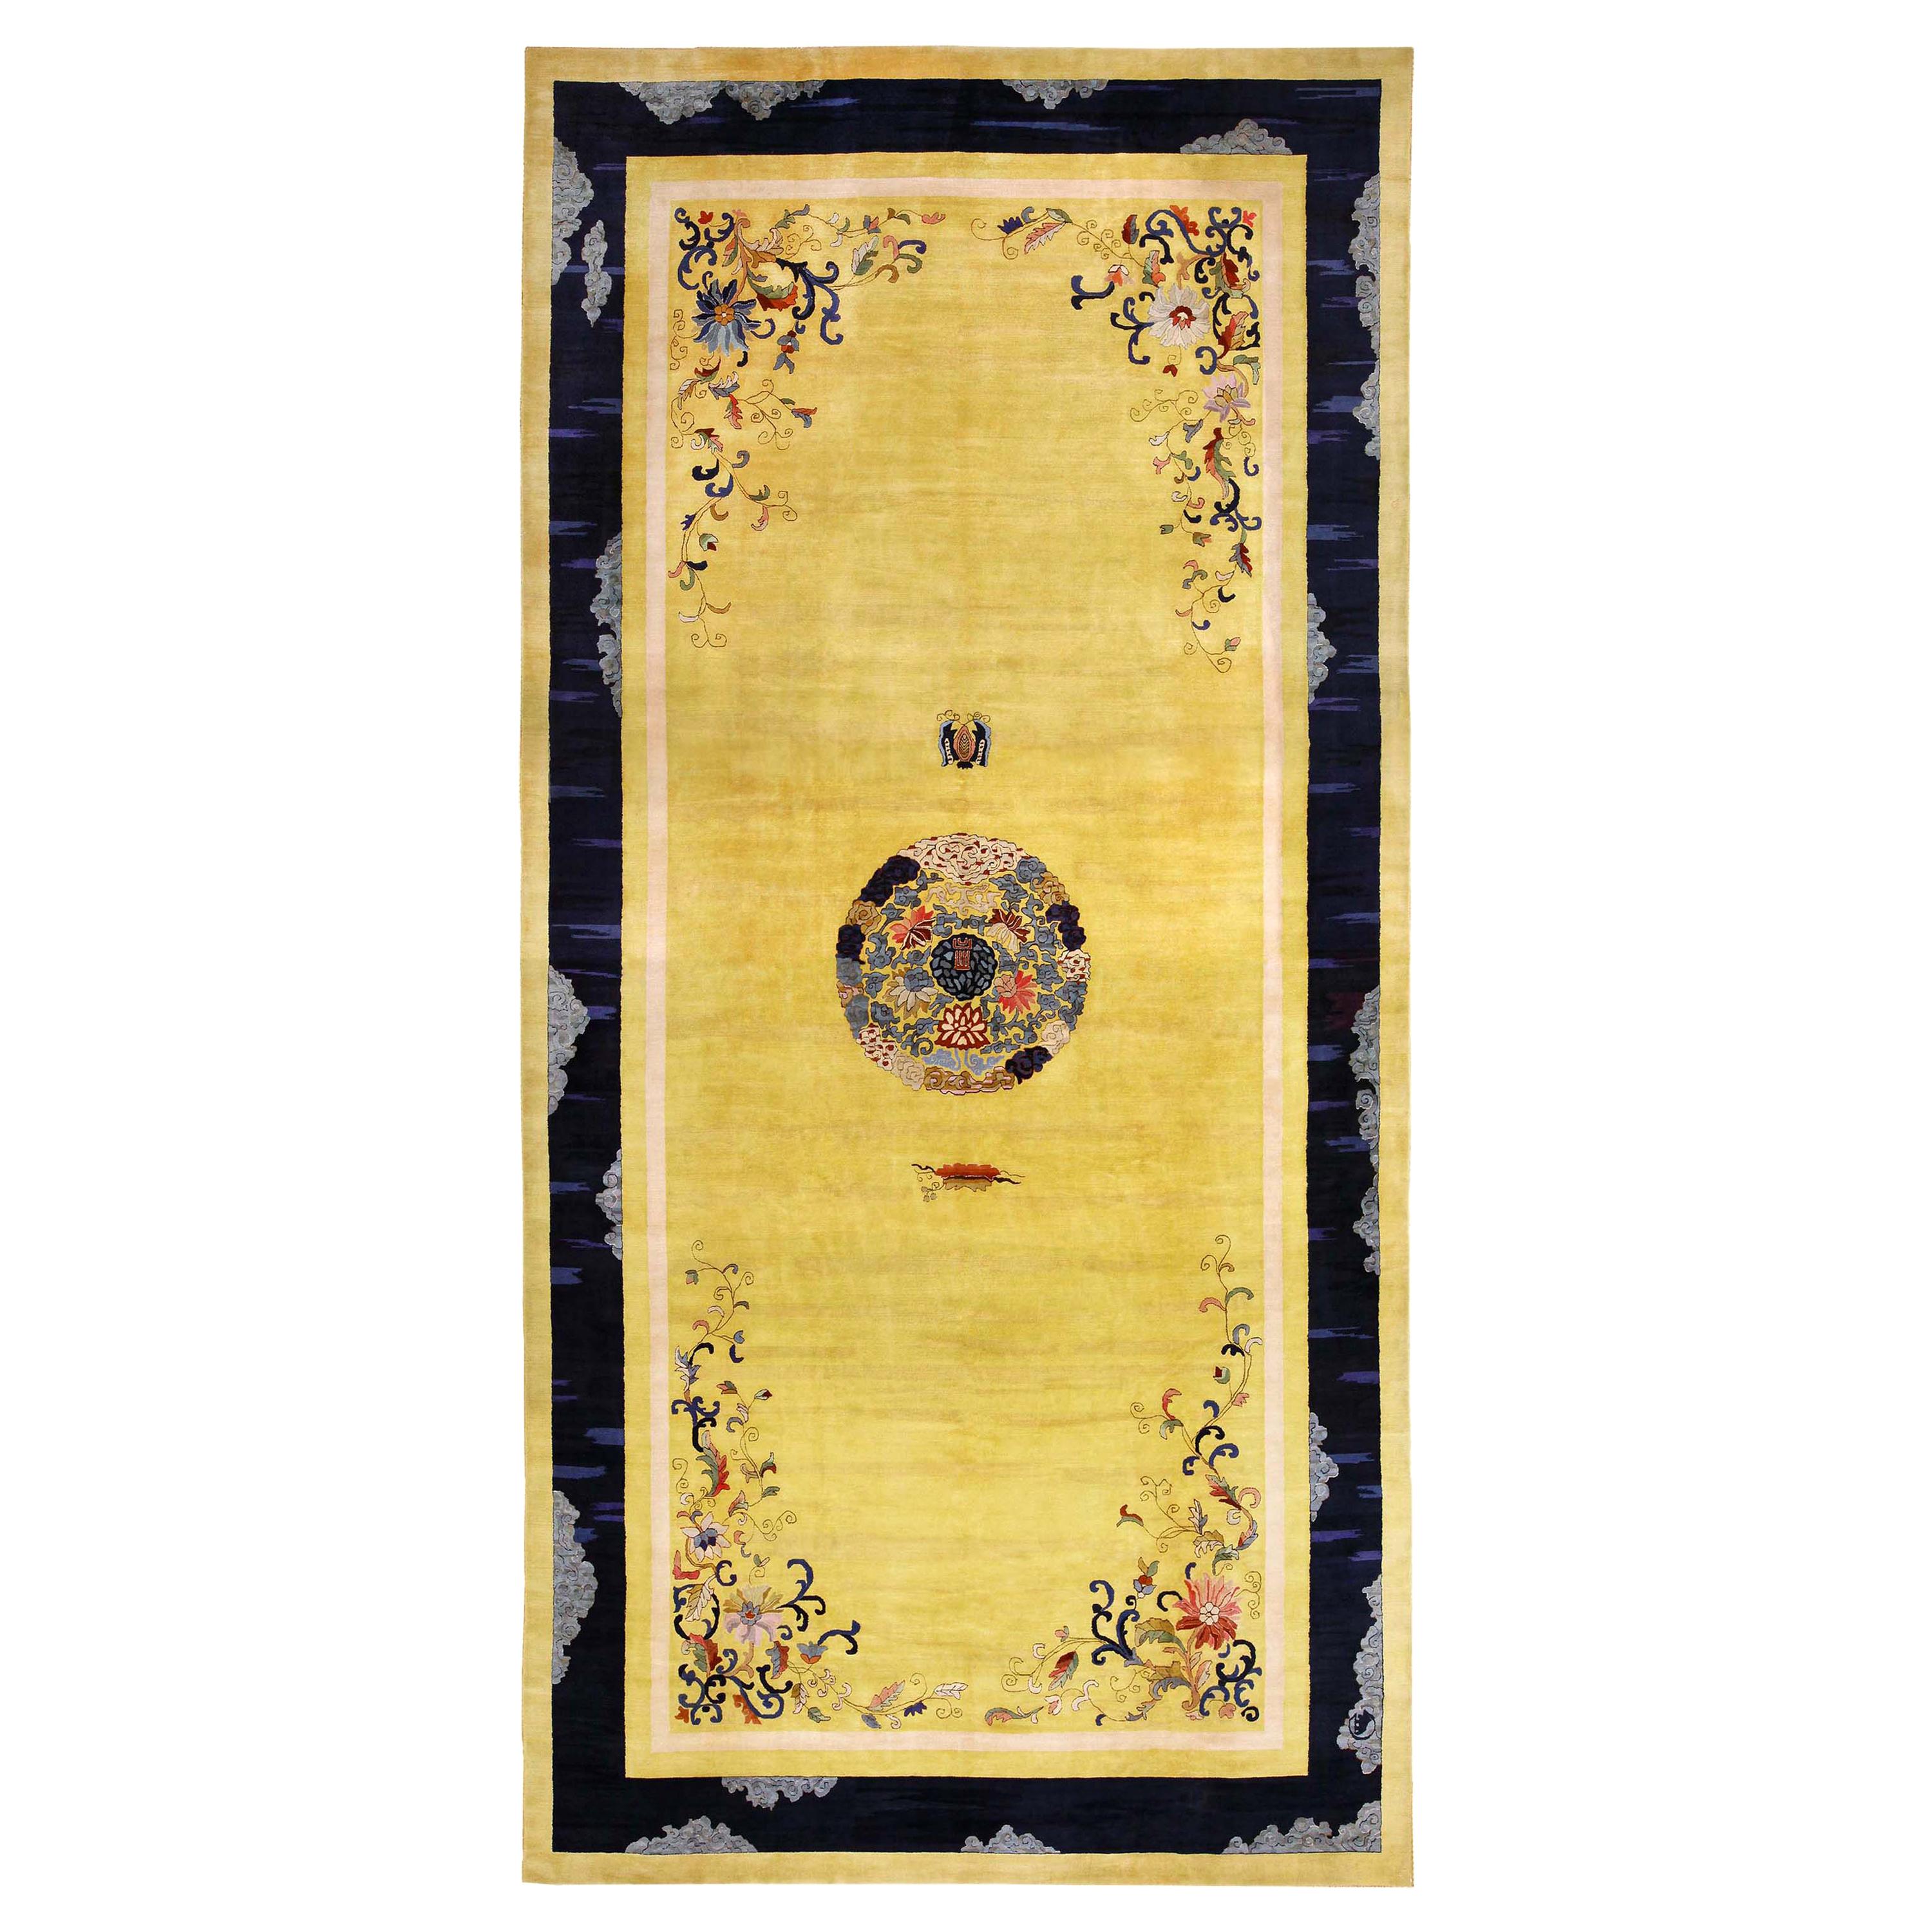 Tapis chinois ancien. Taille : 11 pieds 3 po. x 22 pieds 6 po.